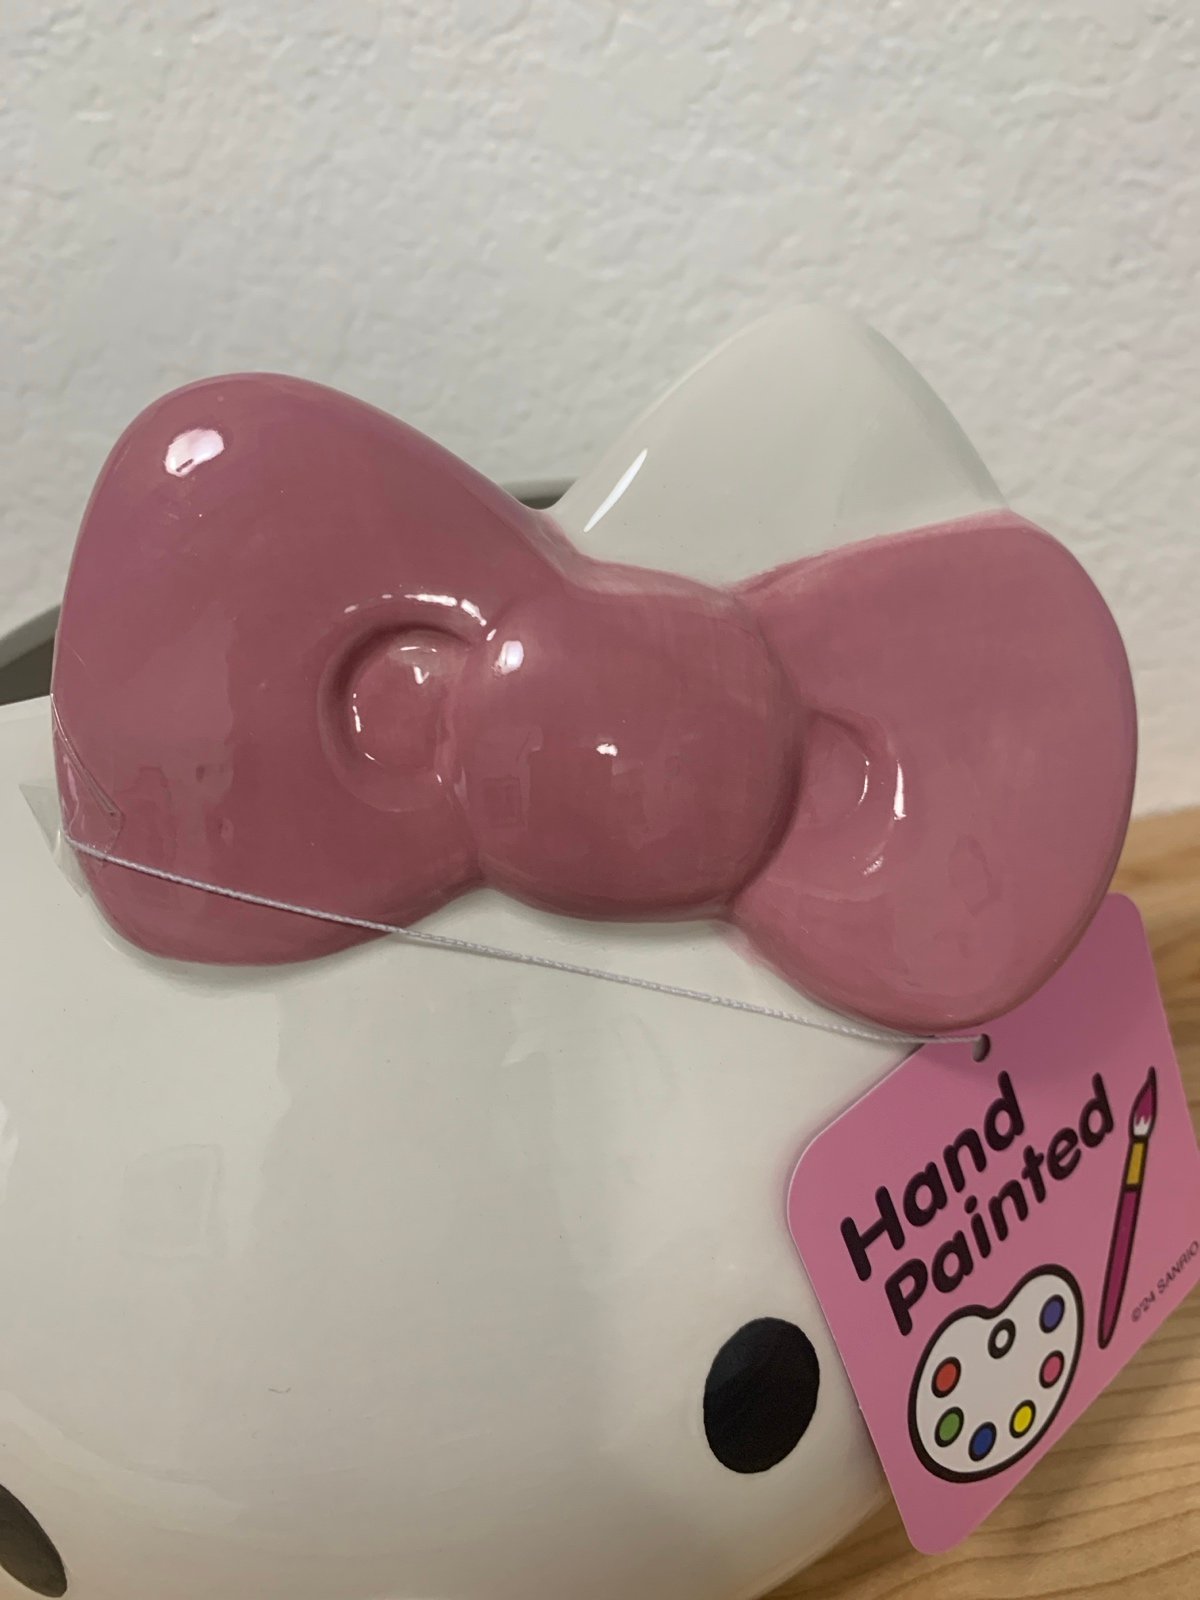 New Sanrio Hello Kitty Ceramic Planter With Pink Bow Tag Attached FOppZBVGD